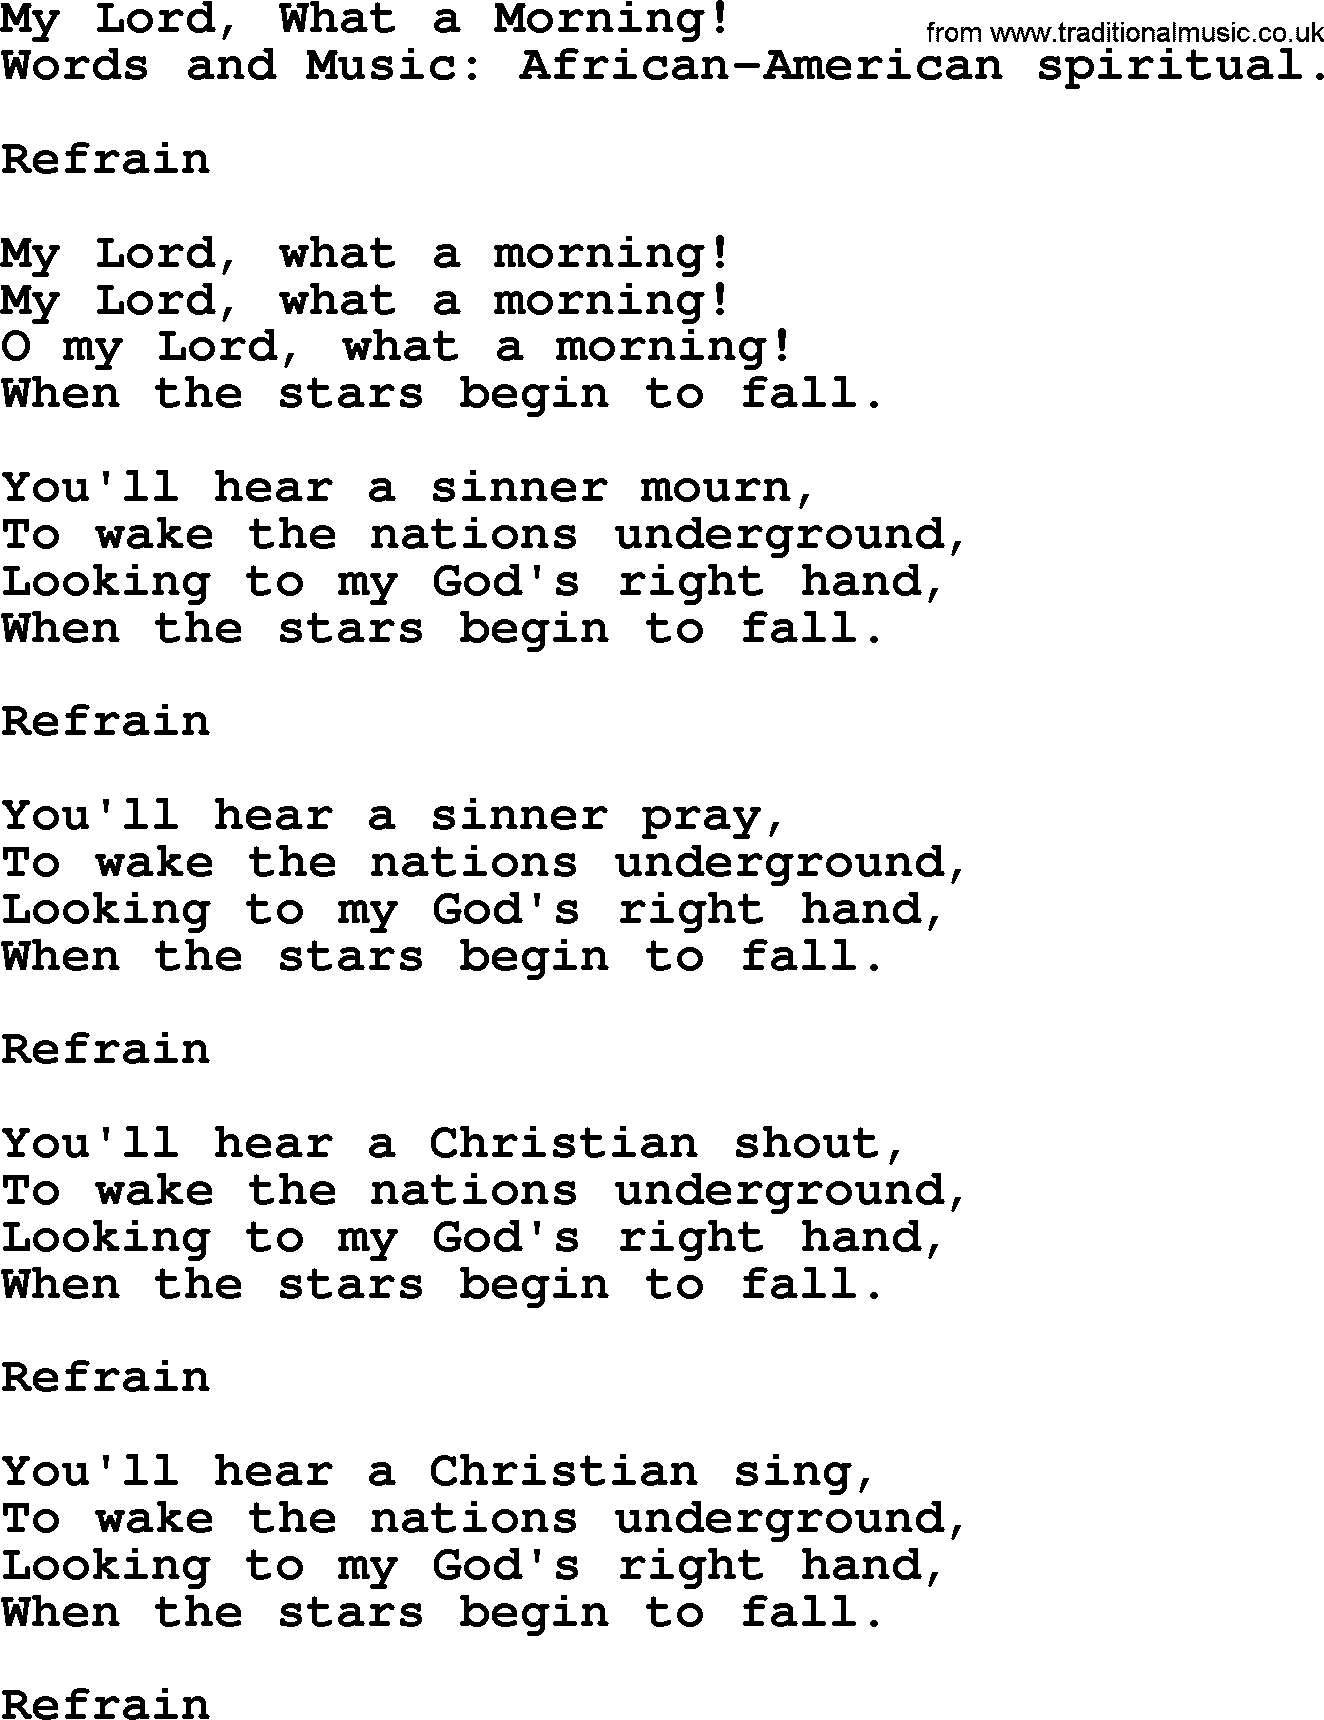 Christian hymns and songs about Jesus' Return(The Second Coming): My Lord, What A Morning!, lyrics with PDF